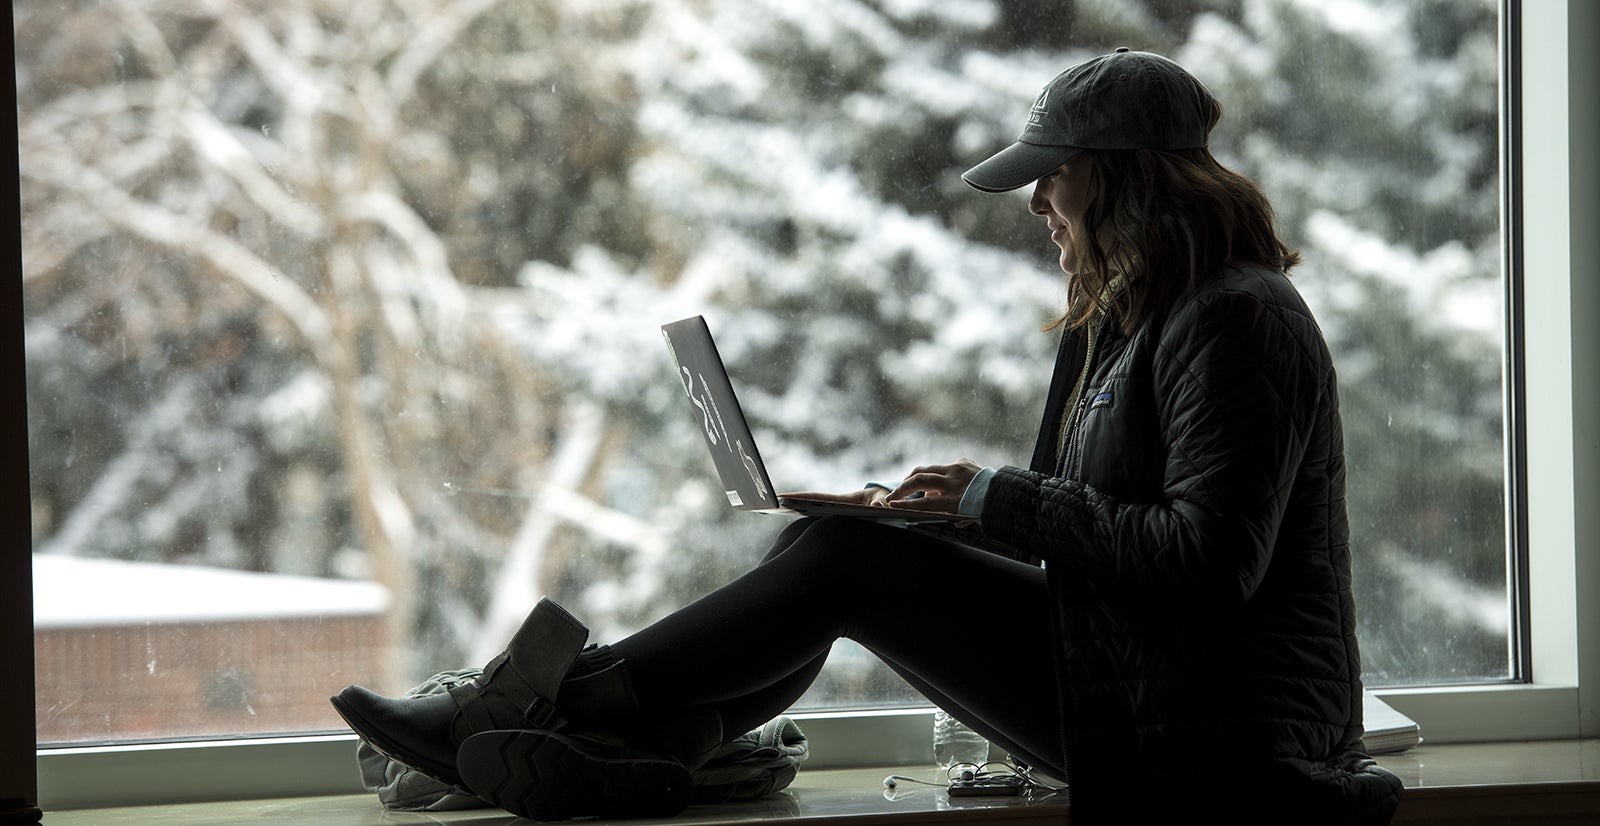 student working on laptop while sitting by a window with a snowy scene